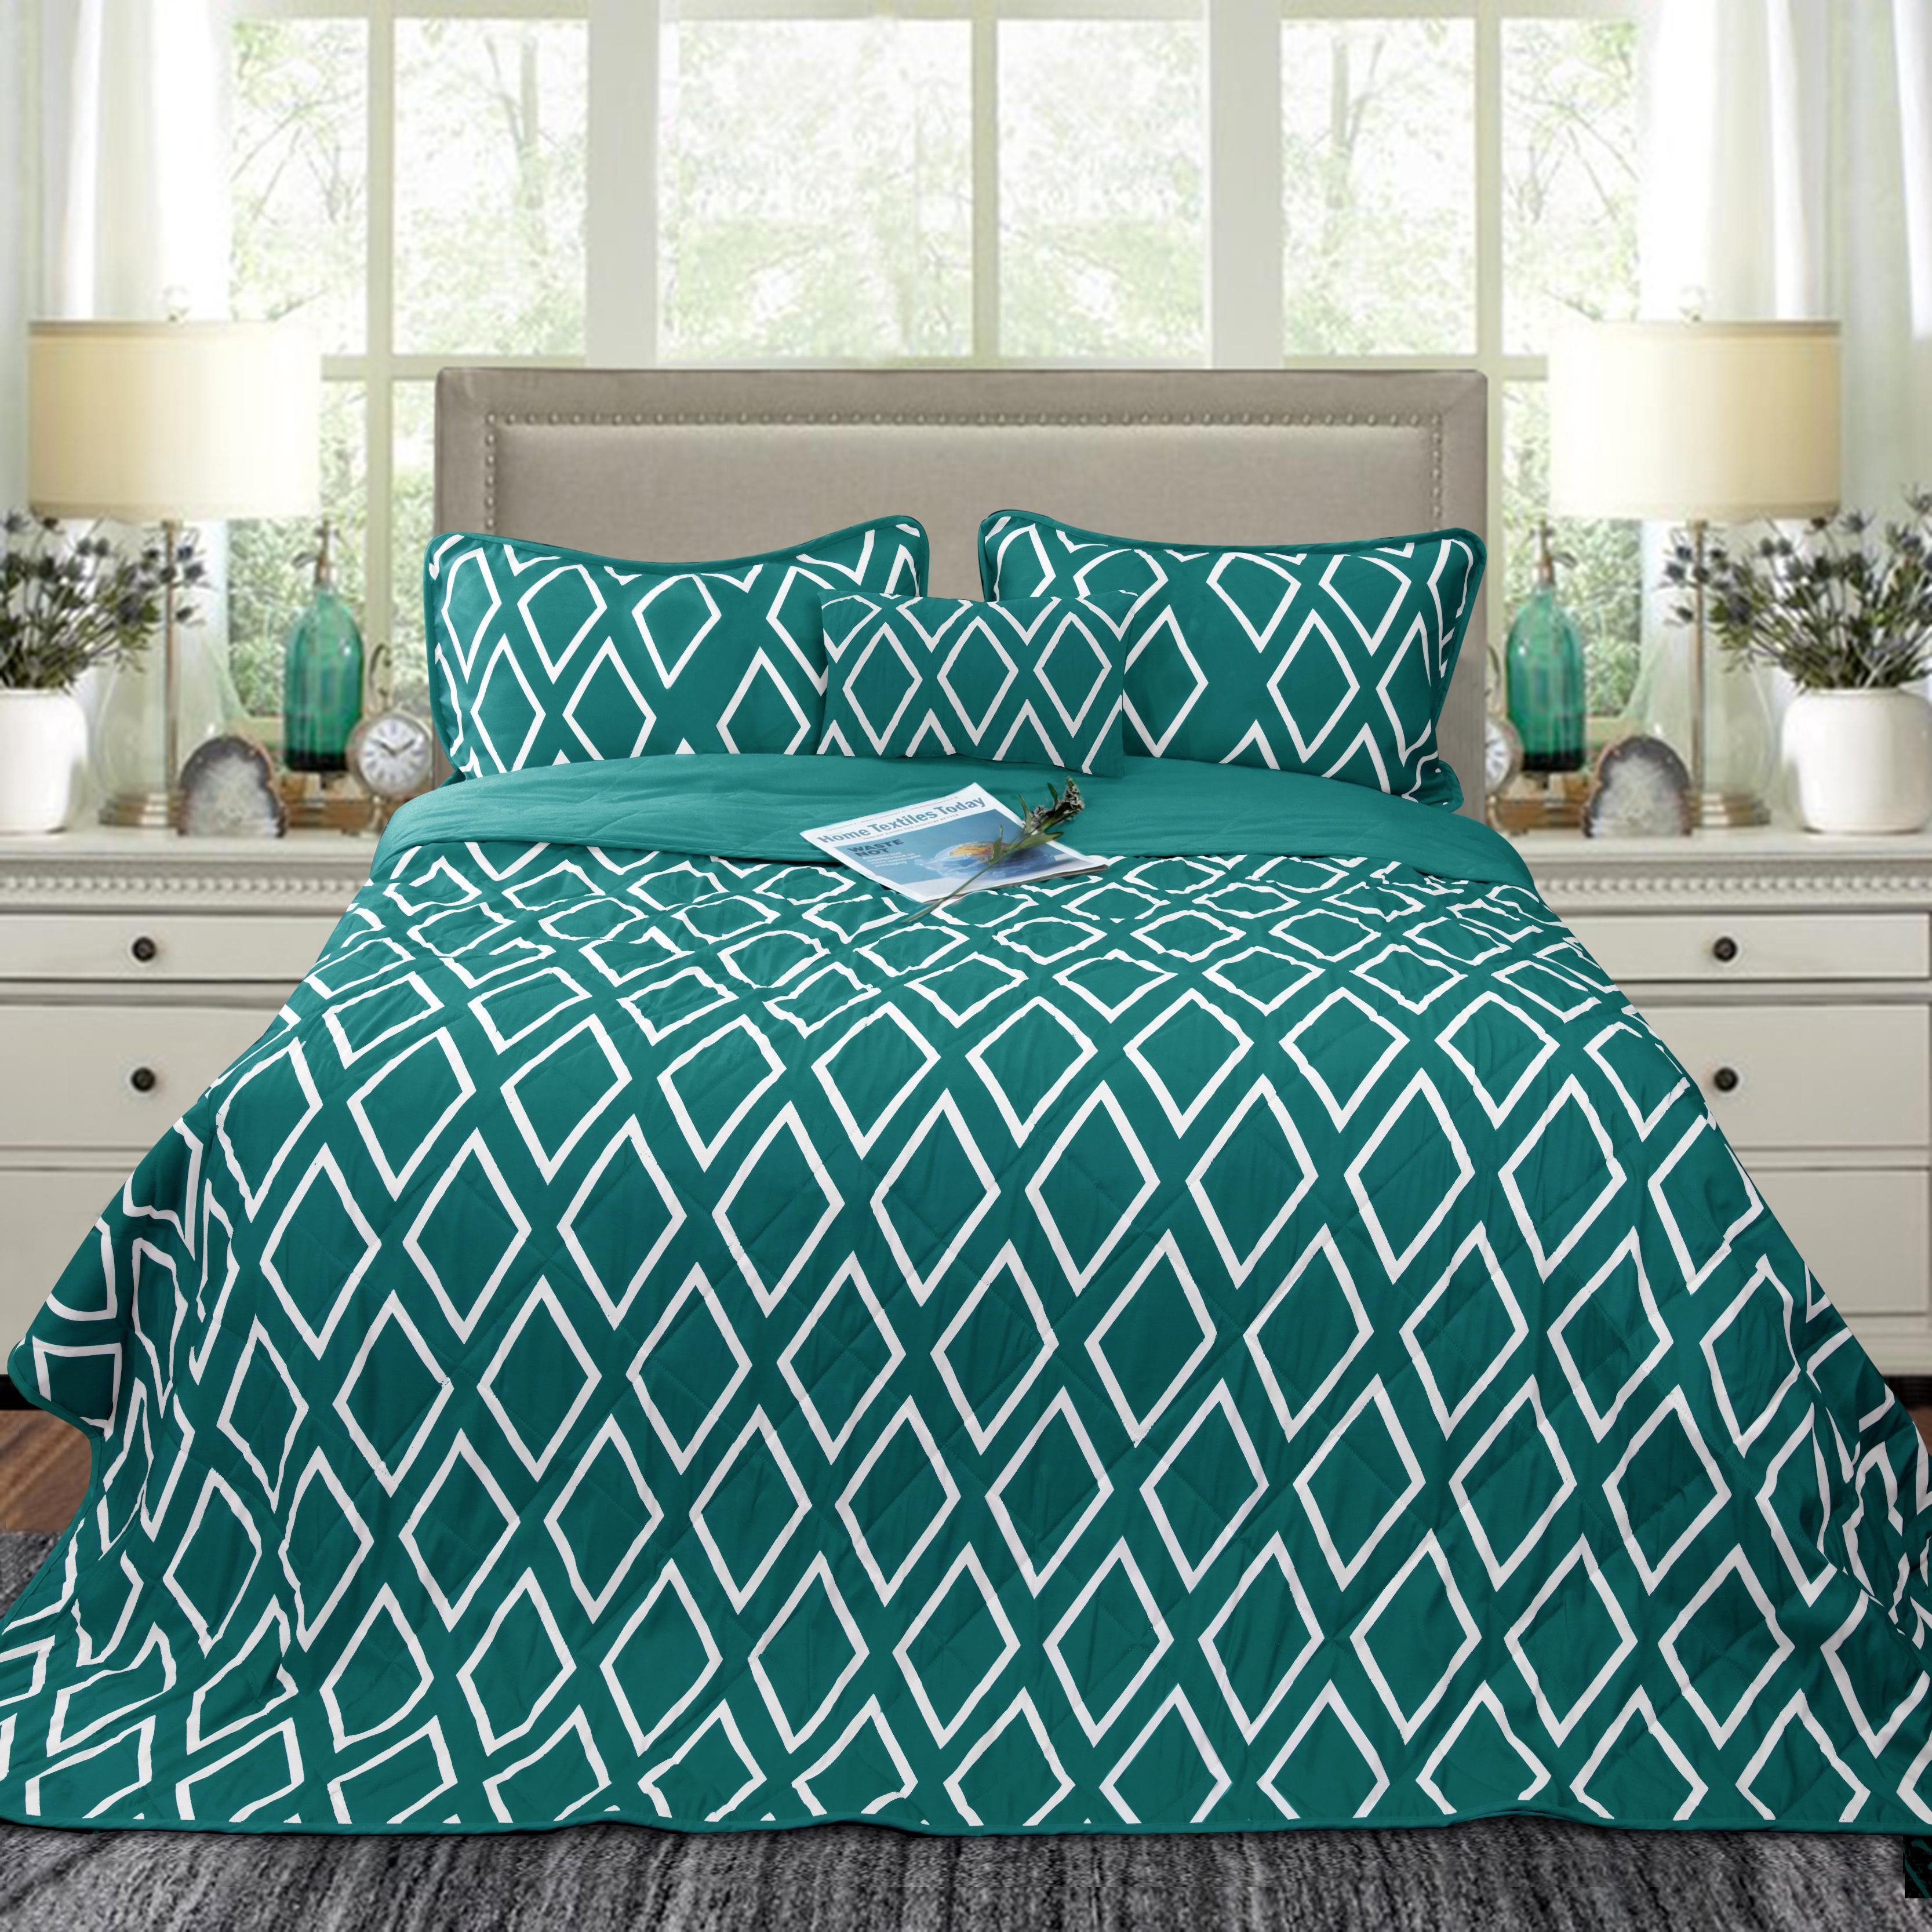 Ramesses Alena 4 Pieces Reversible Ultrasonic And Embossed Micro Flannel Comforter Set Queen-Teal